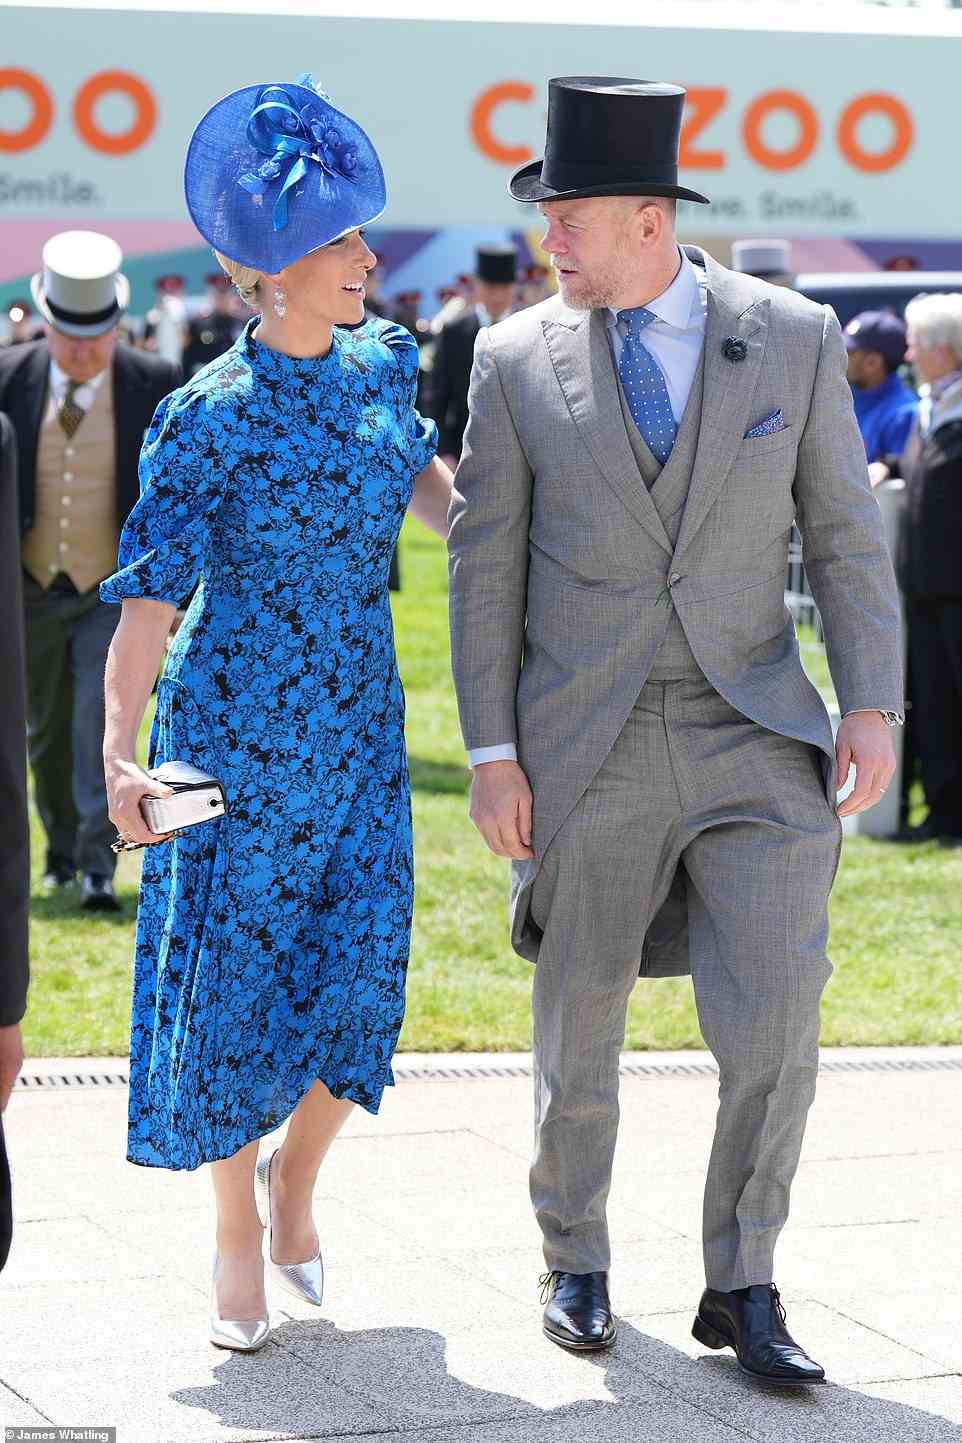 Zara put on a stunning display in a vibrant blue dress as she joined her husband at the Epsom Derby on Saturday afternoon